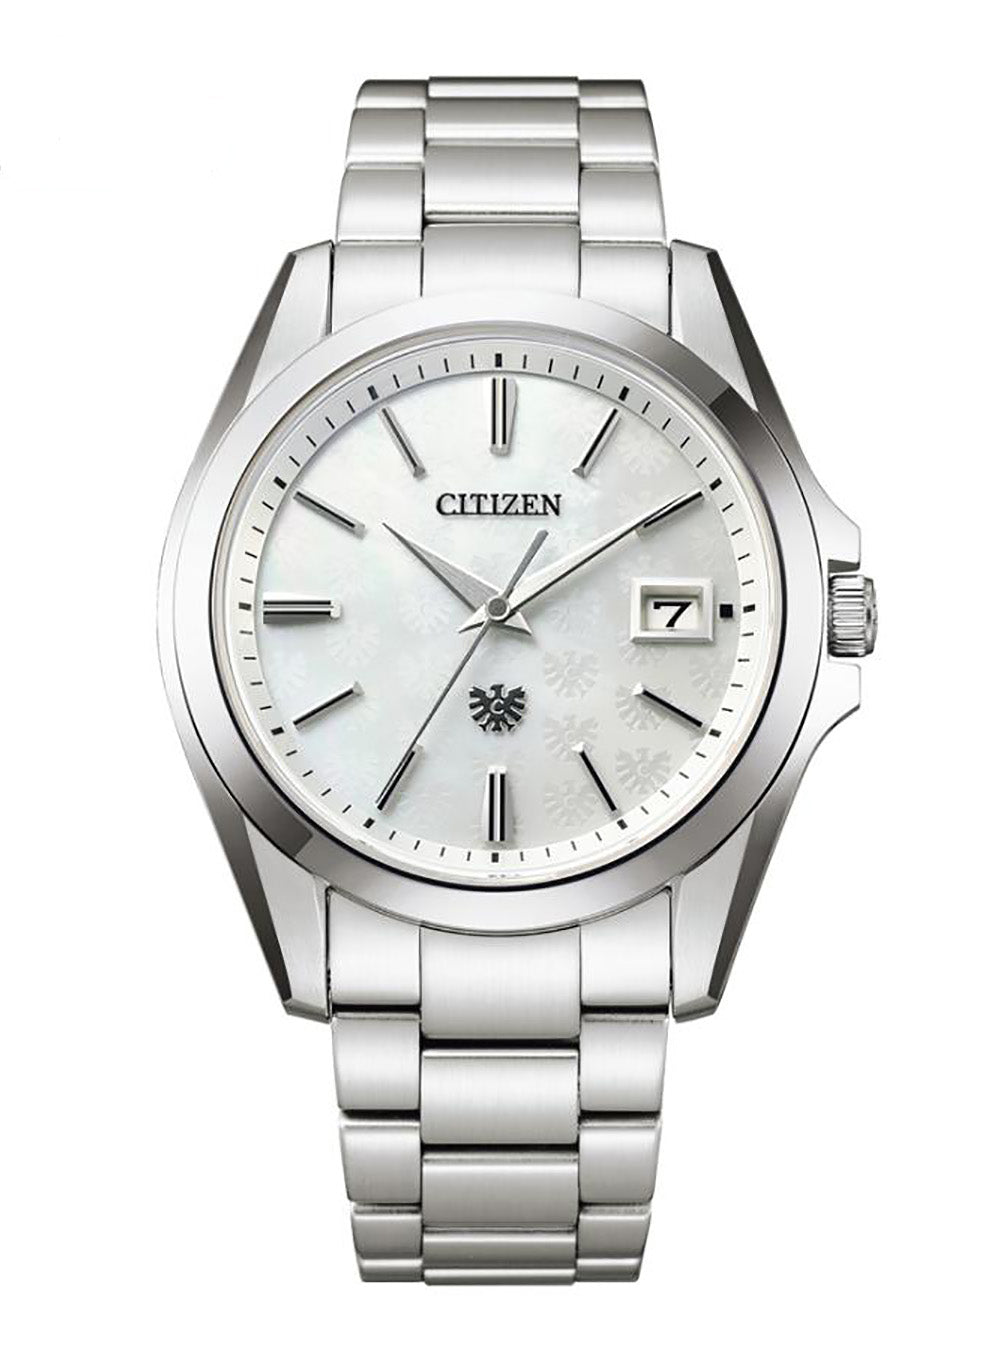 CITIZEN THE CITIZEN AQ4060-50W LIMITED EDITION MADE IN JAPAN JDM